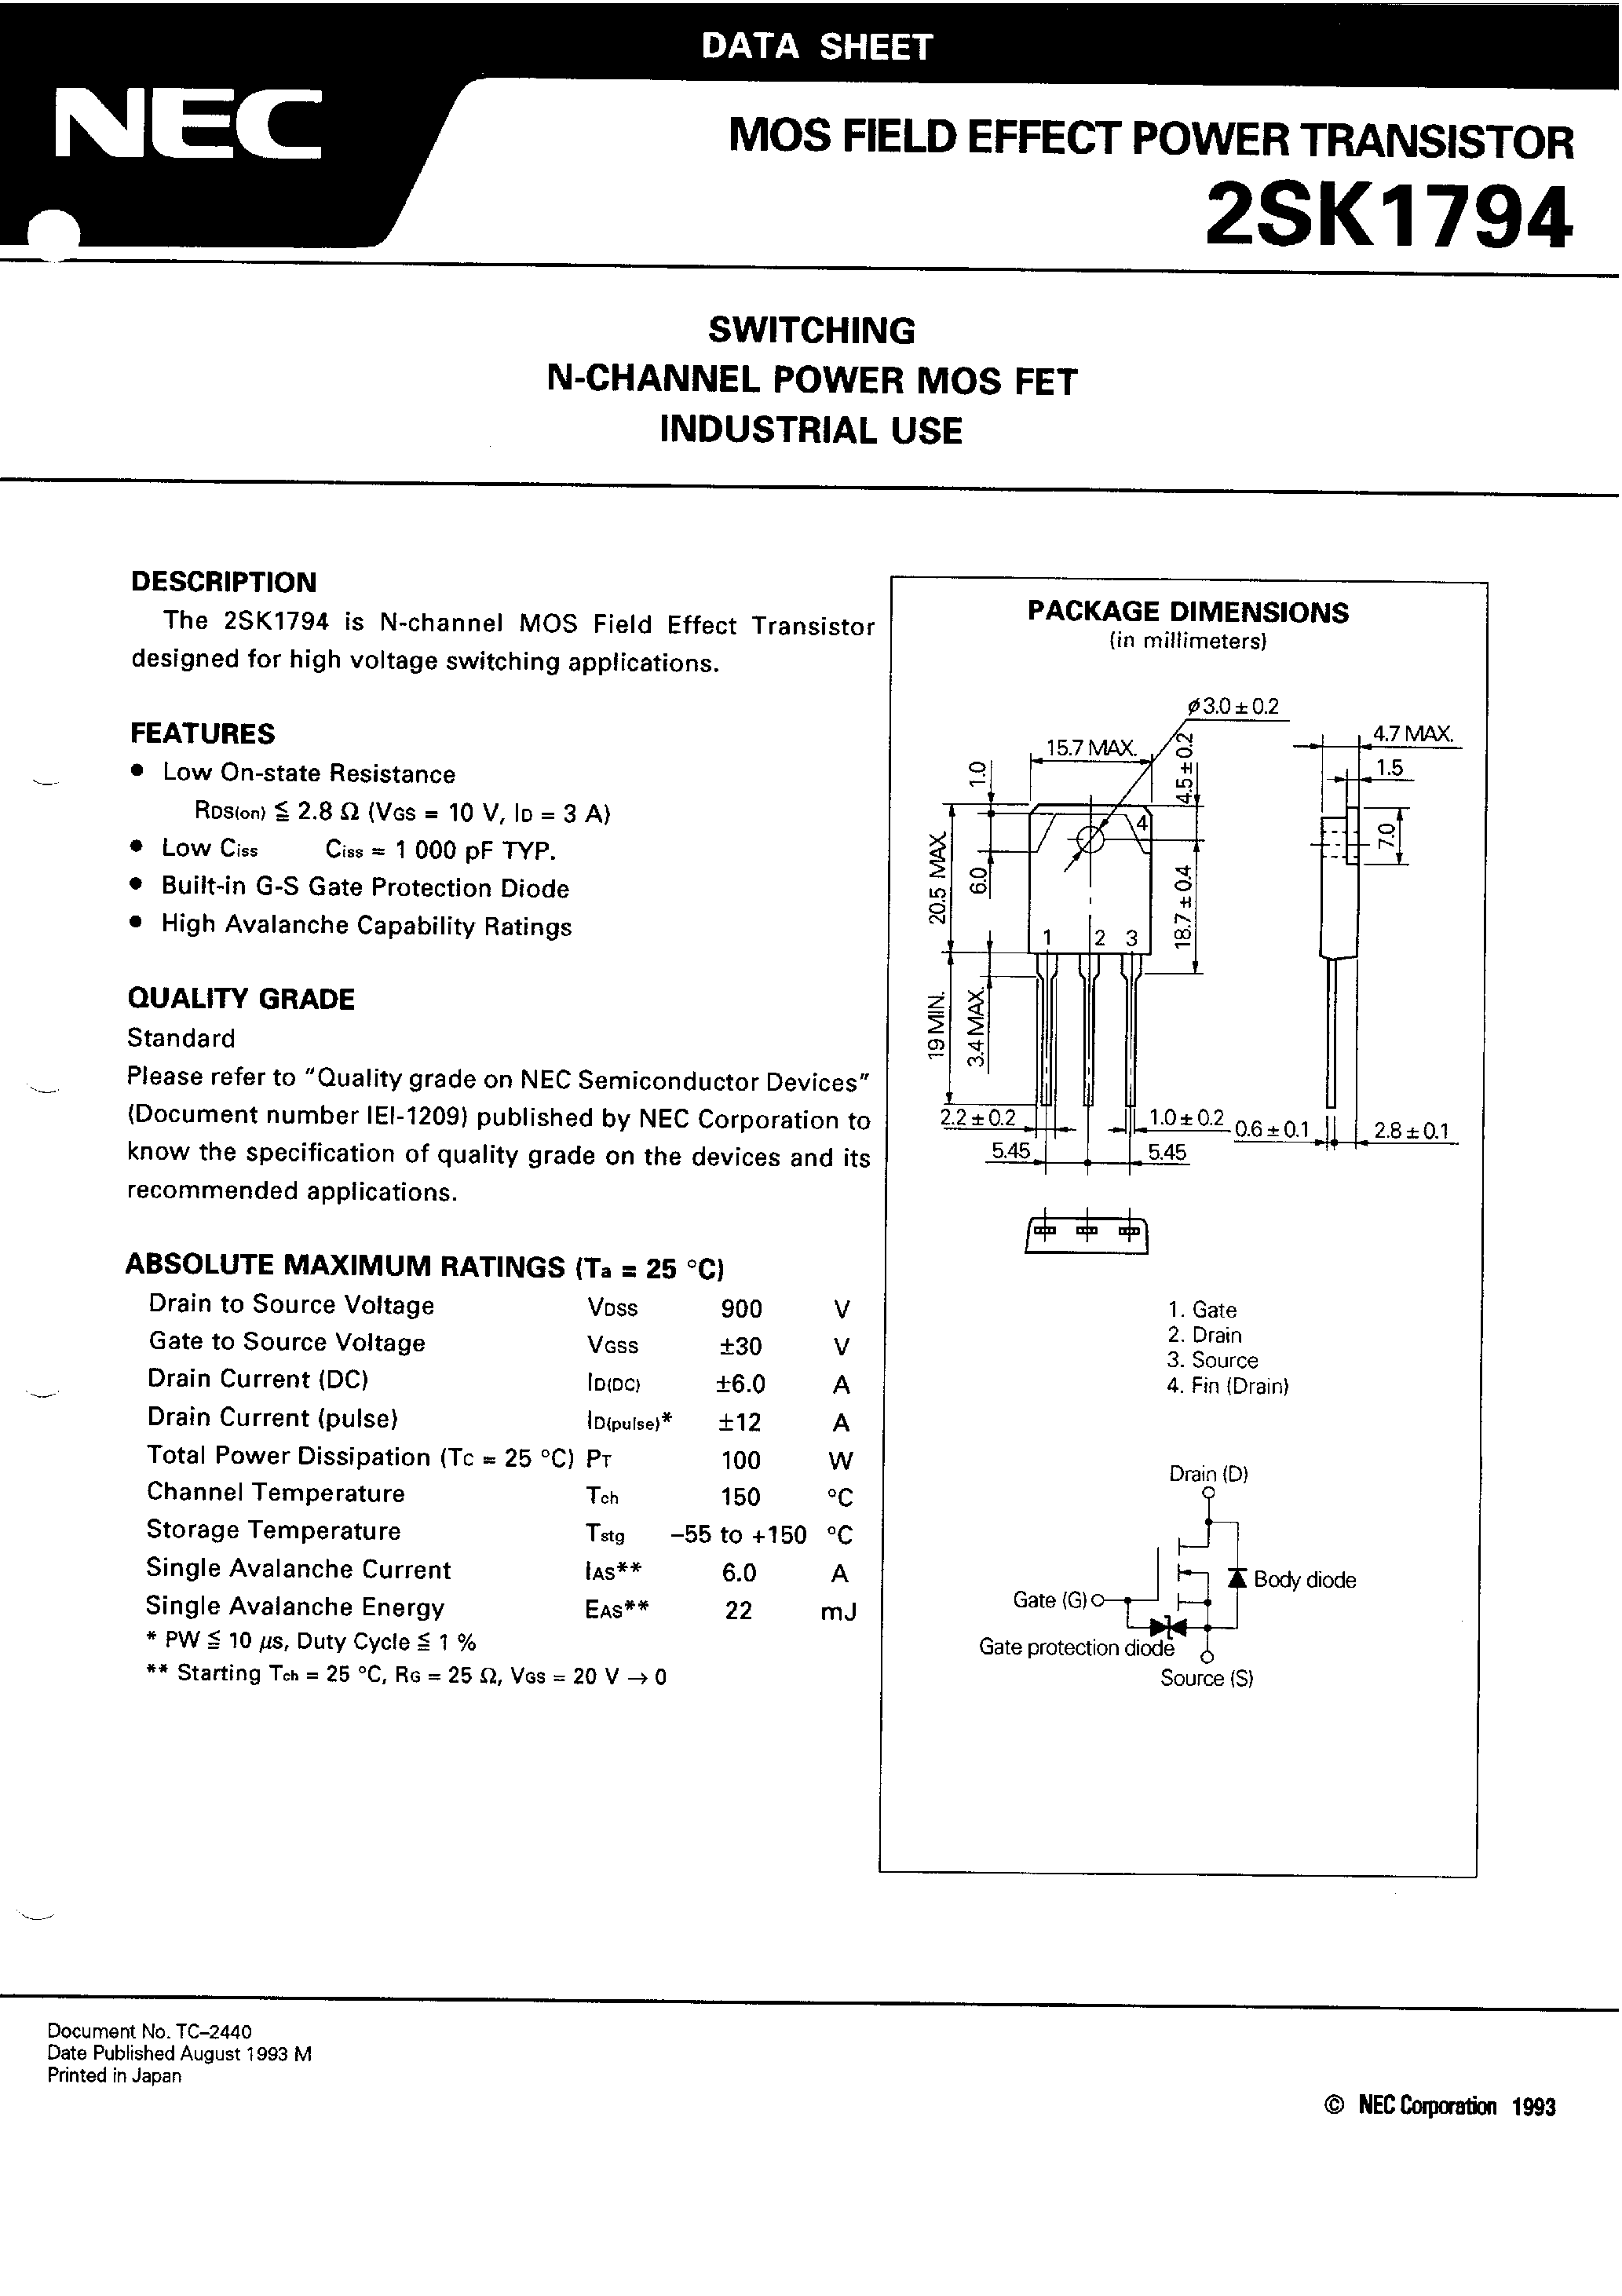 Datasheet K1794 - Search -----> 2SK1794 page 2